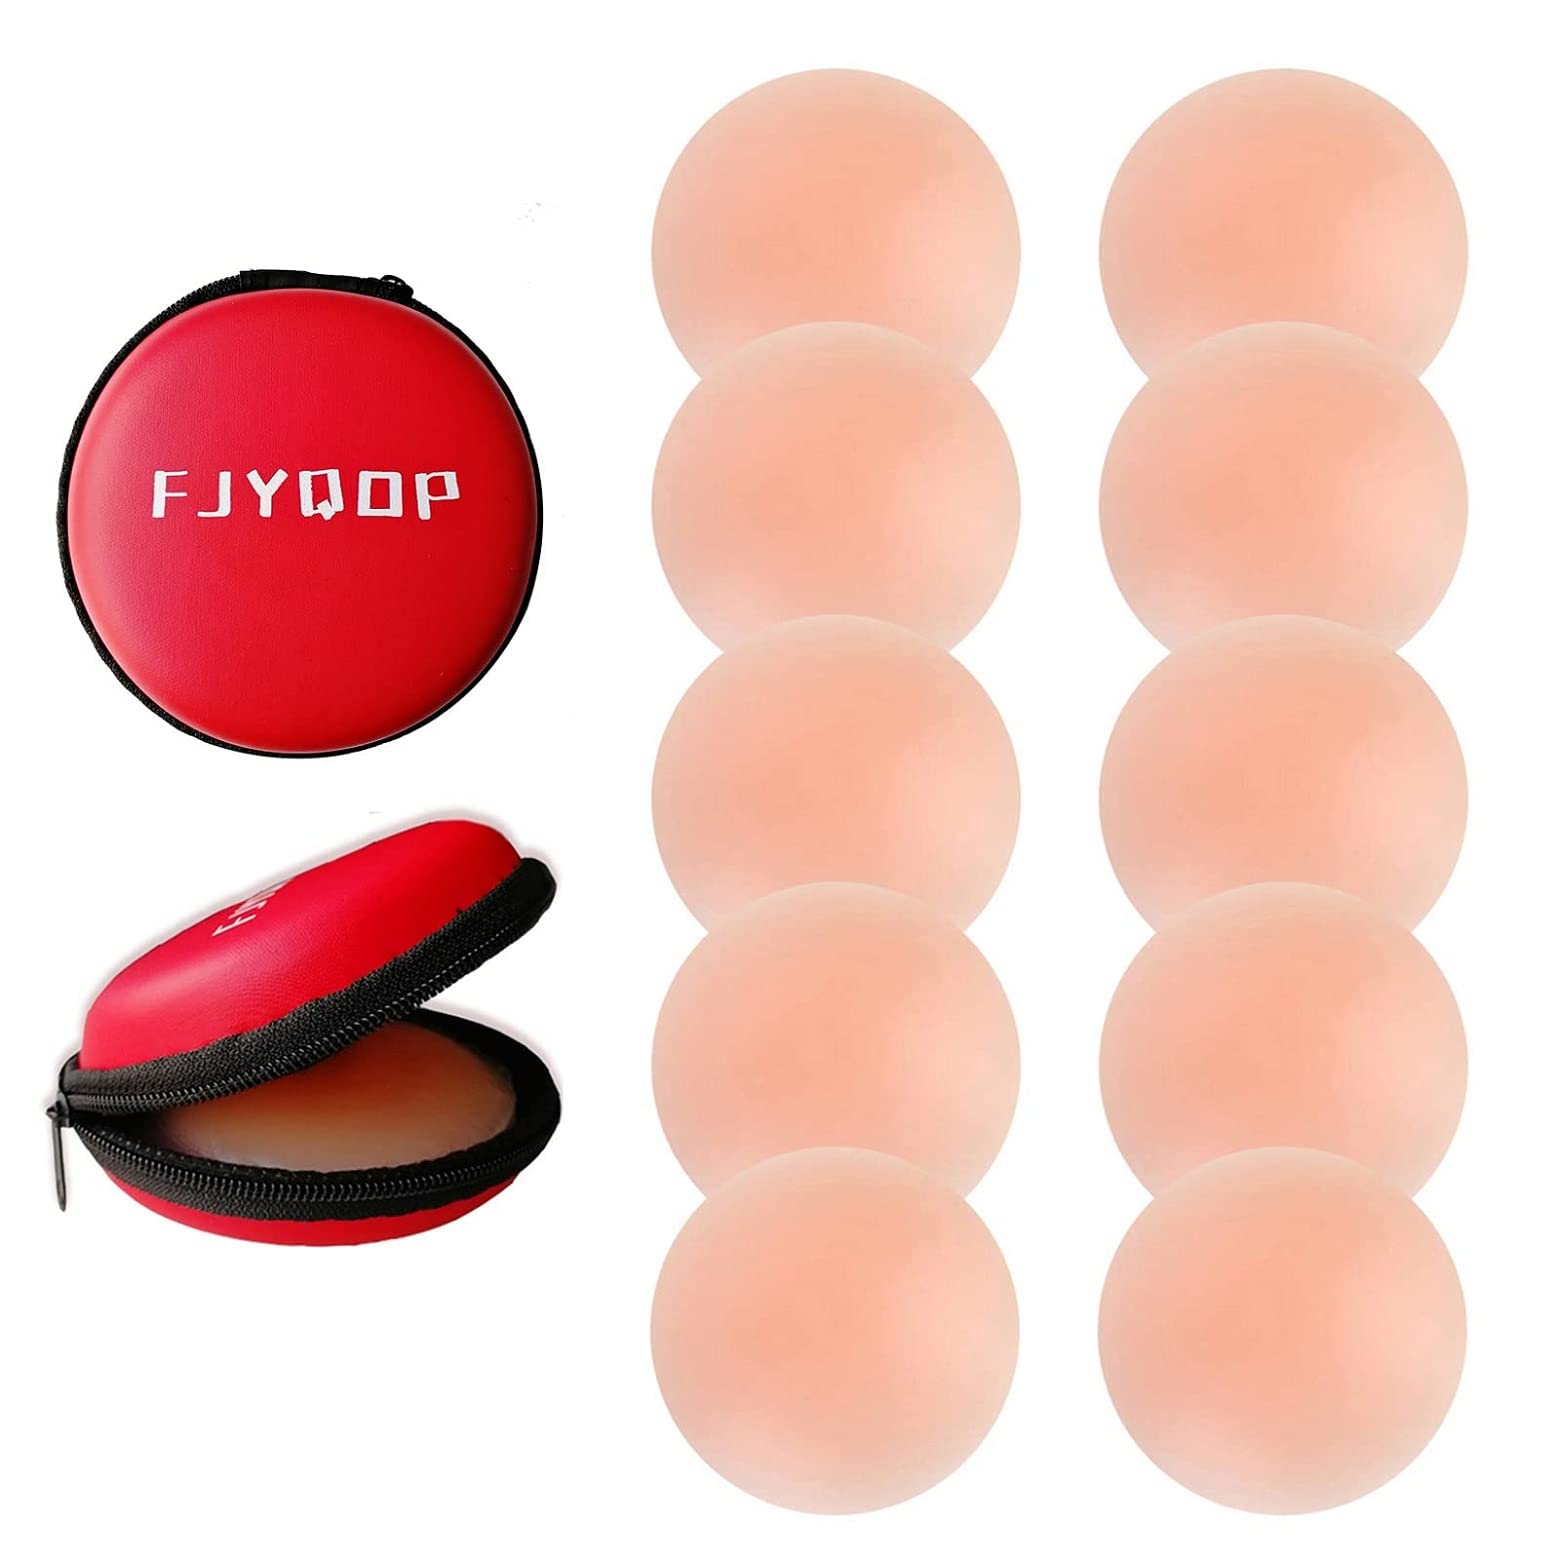 FJYQOP Silicone Nipple Covers - 5 Pairs, Women's Reusable Adhesive Invisible Pasties Nippleless Covers Round